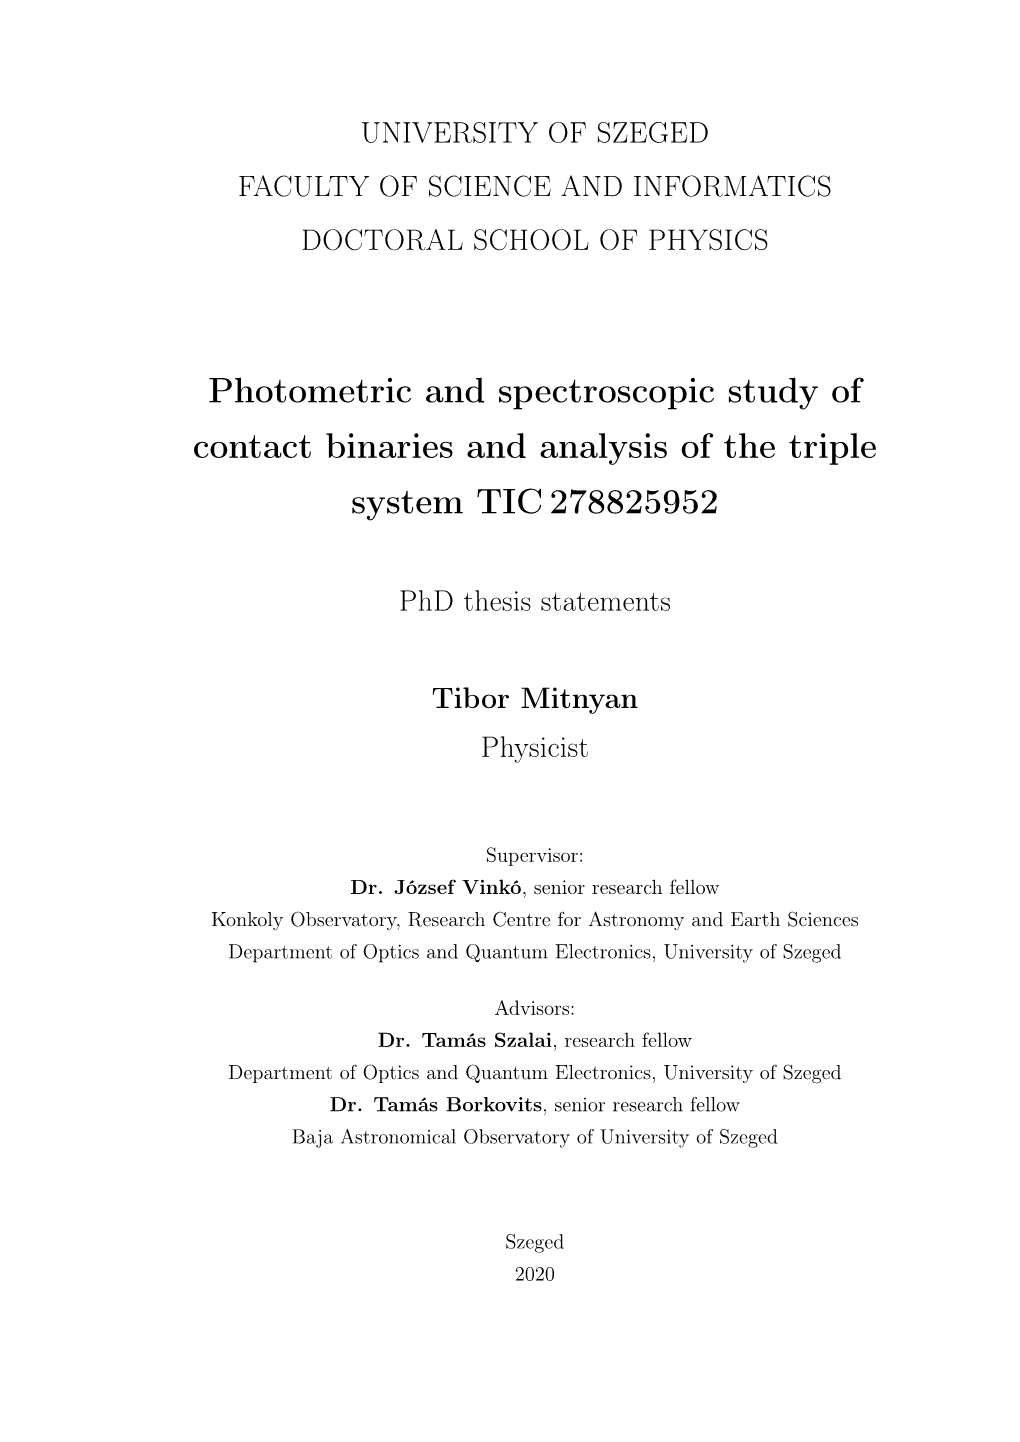 Photometric and Spectroscopic Study of Contact Binaries and Analysis of the Triple System TIC 278825952